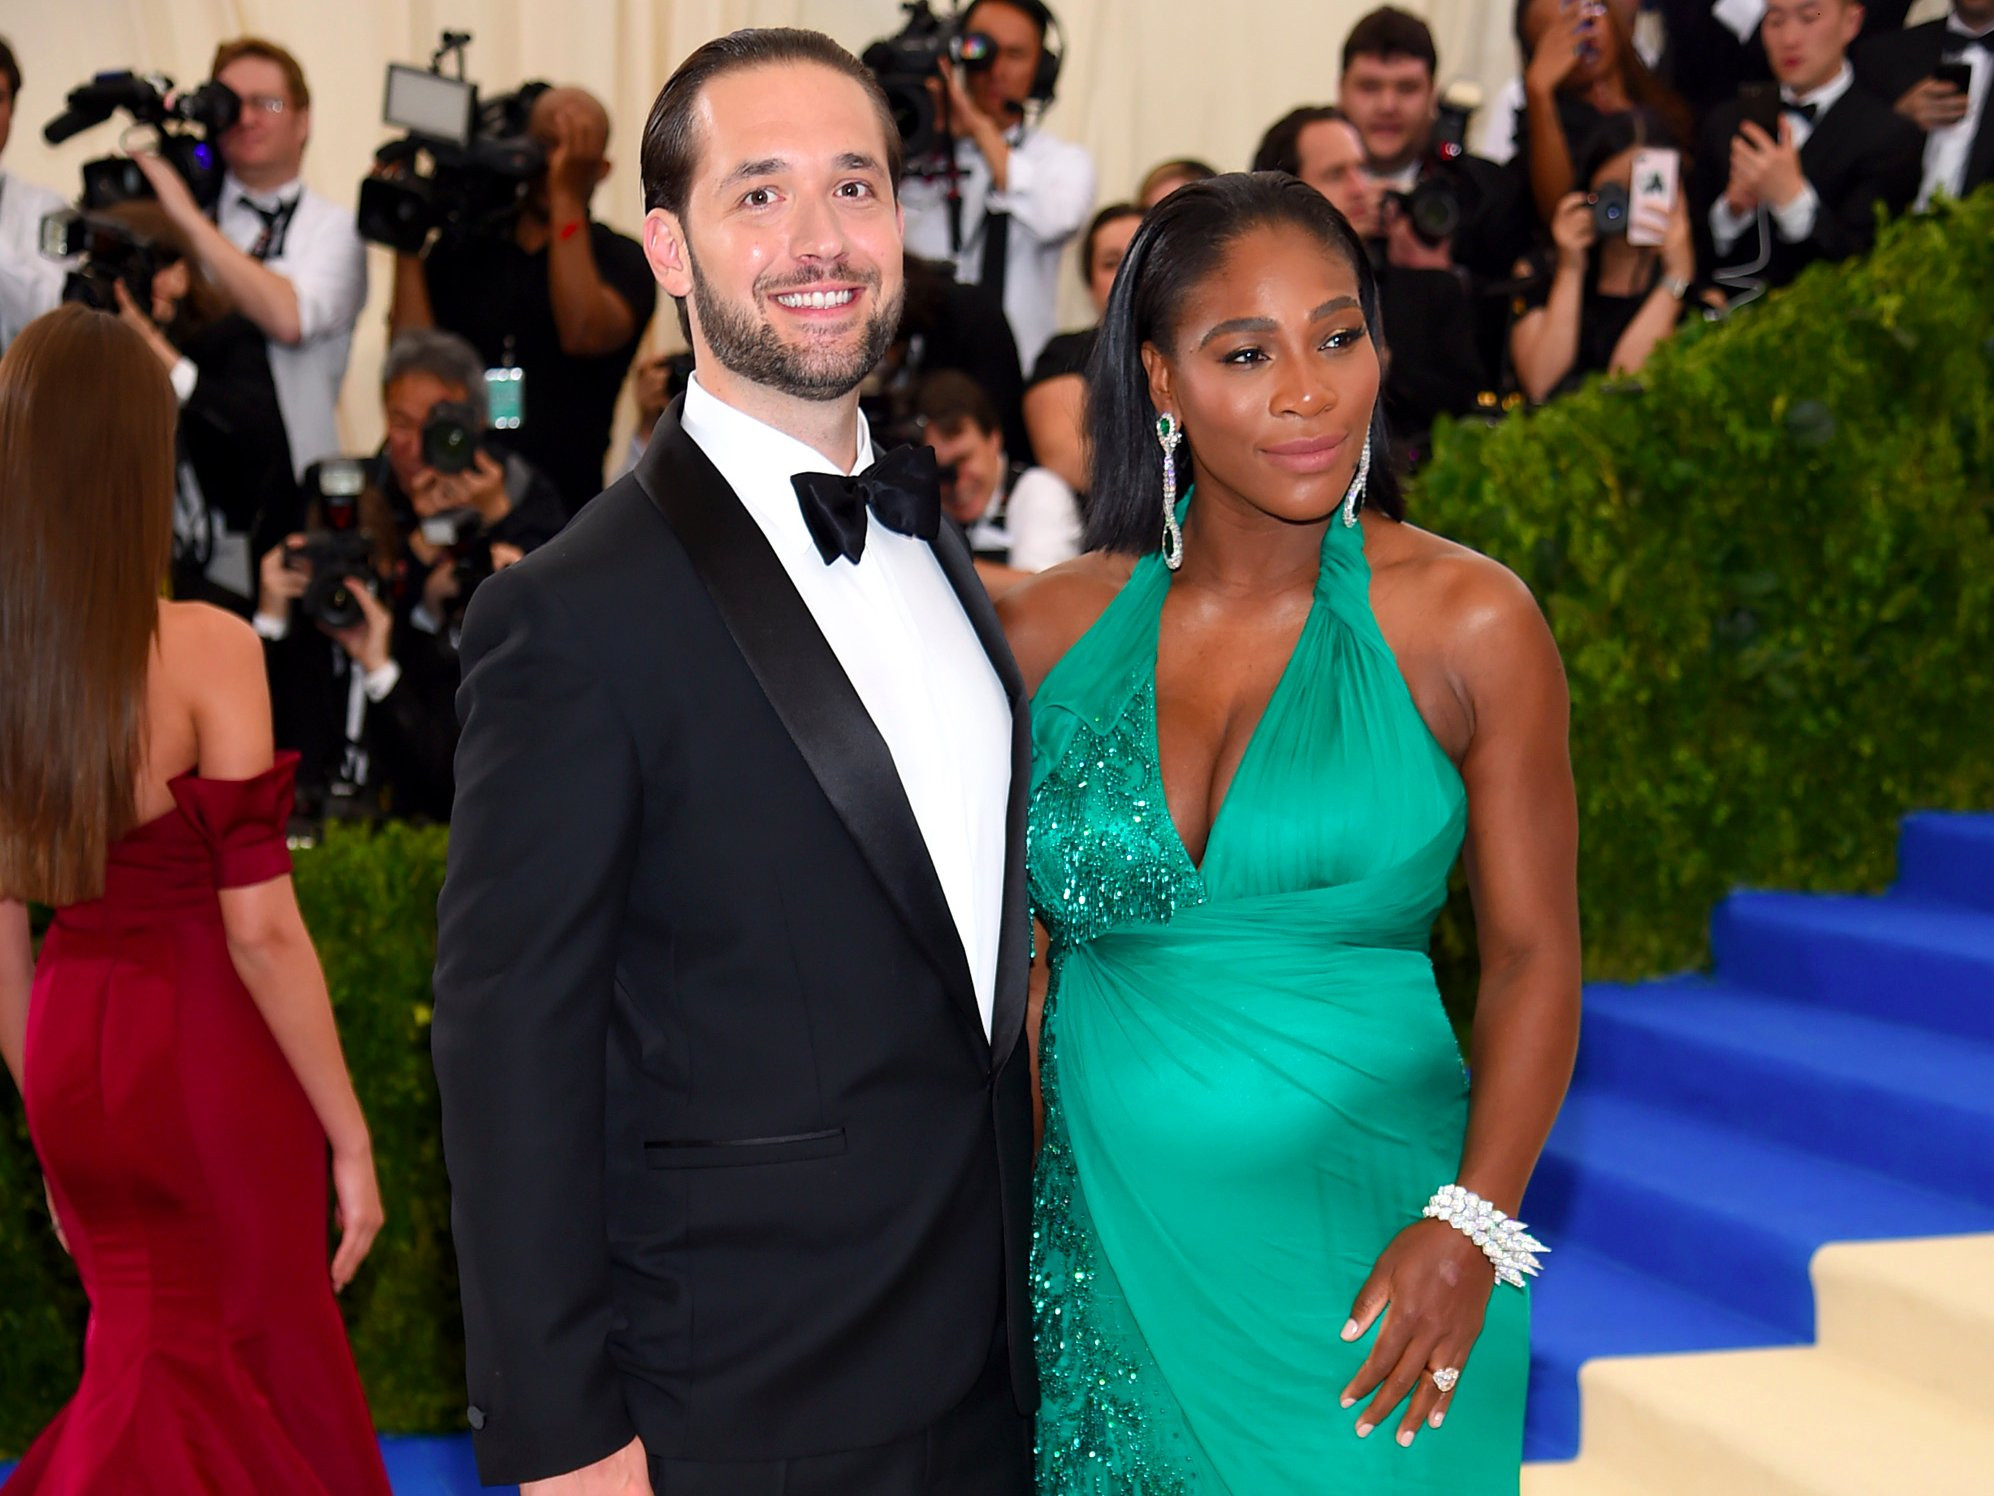 Alexis Ohanian Hochzeit
 The love story of Serena Williams and Alexis Ohanian